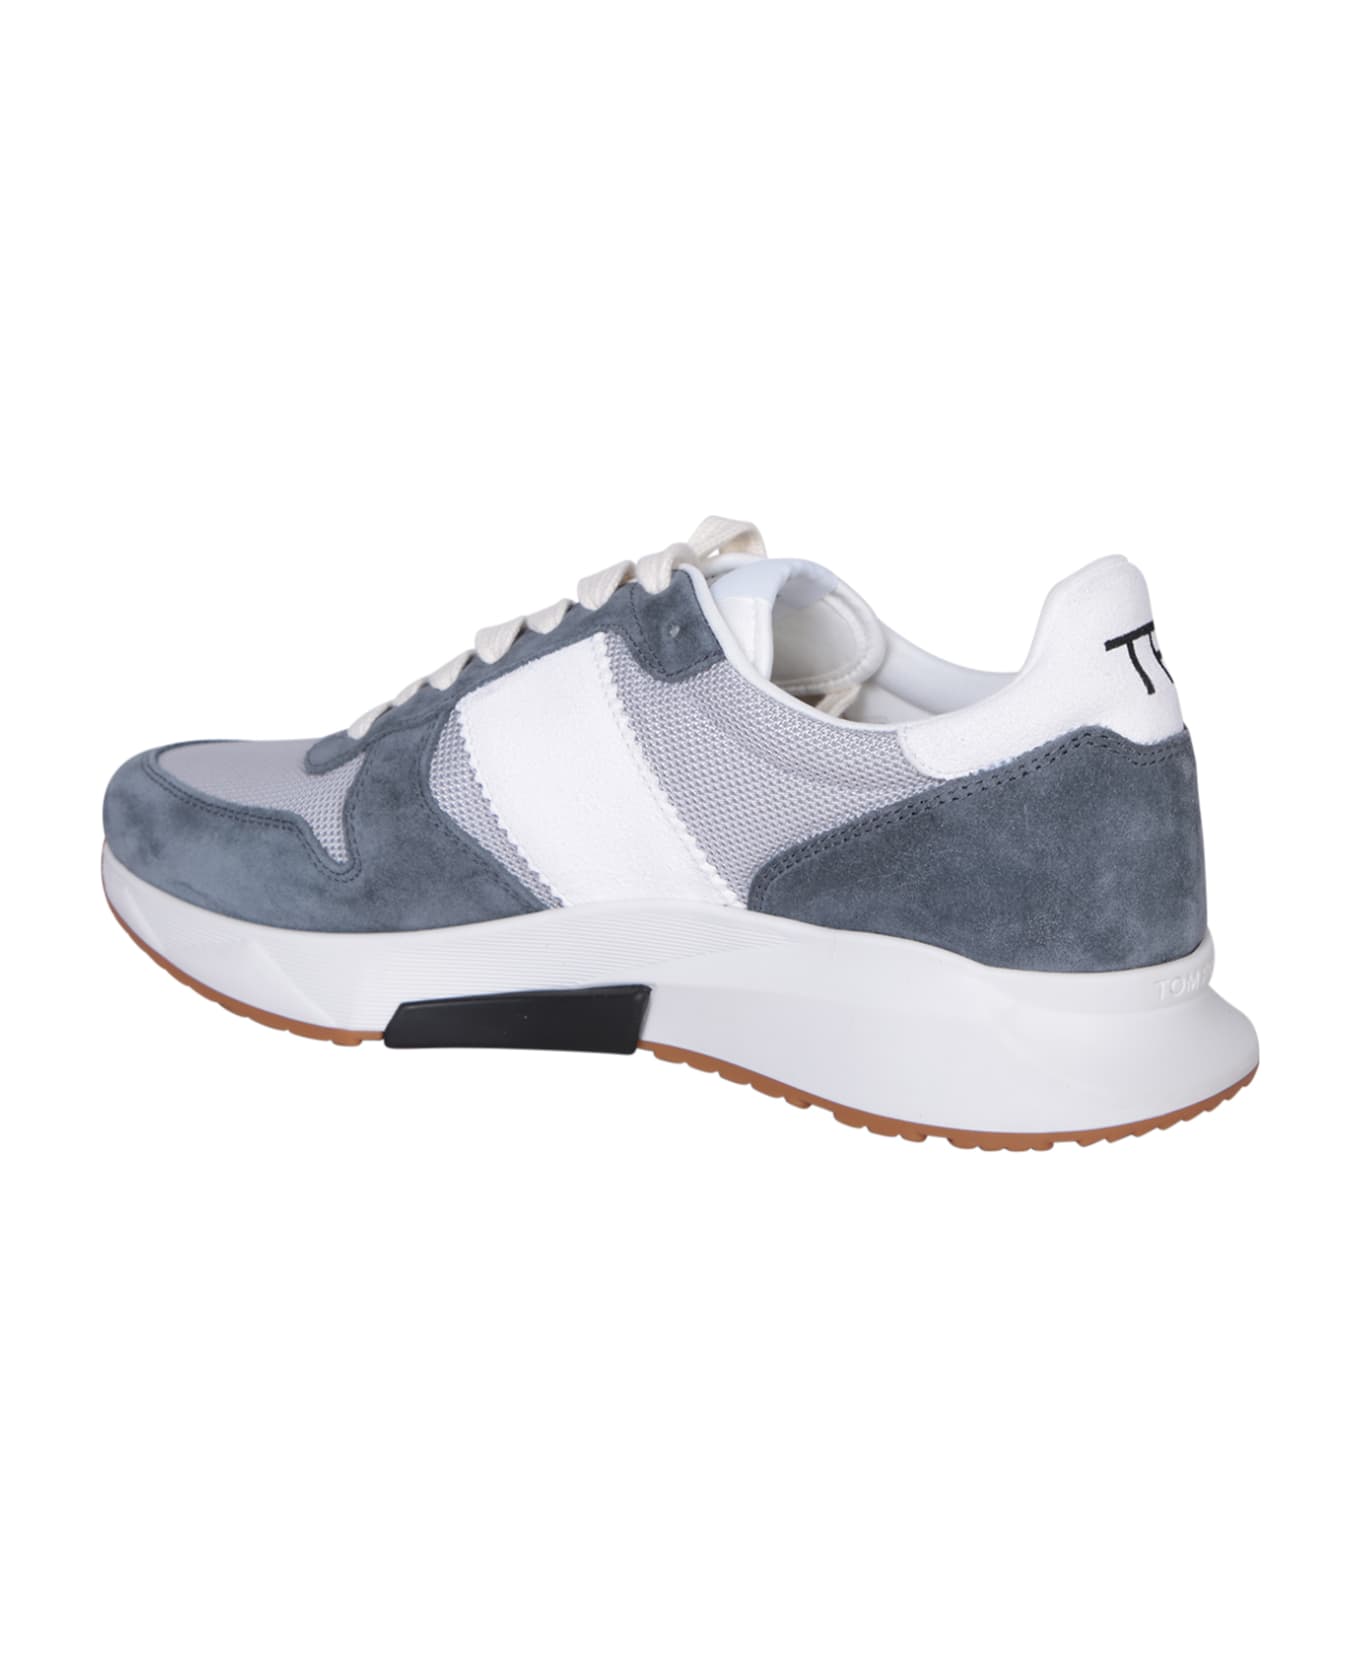 Tom Ford Yagga White Sneakers - Blue